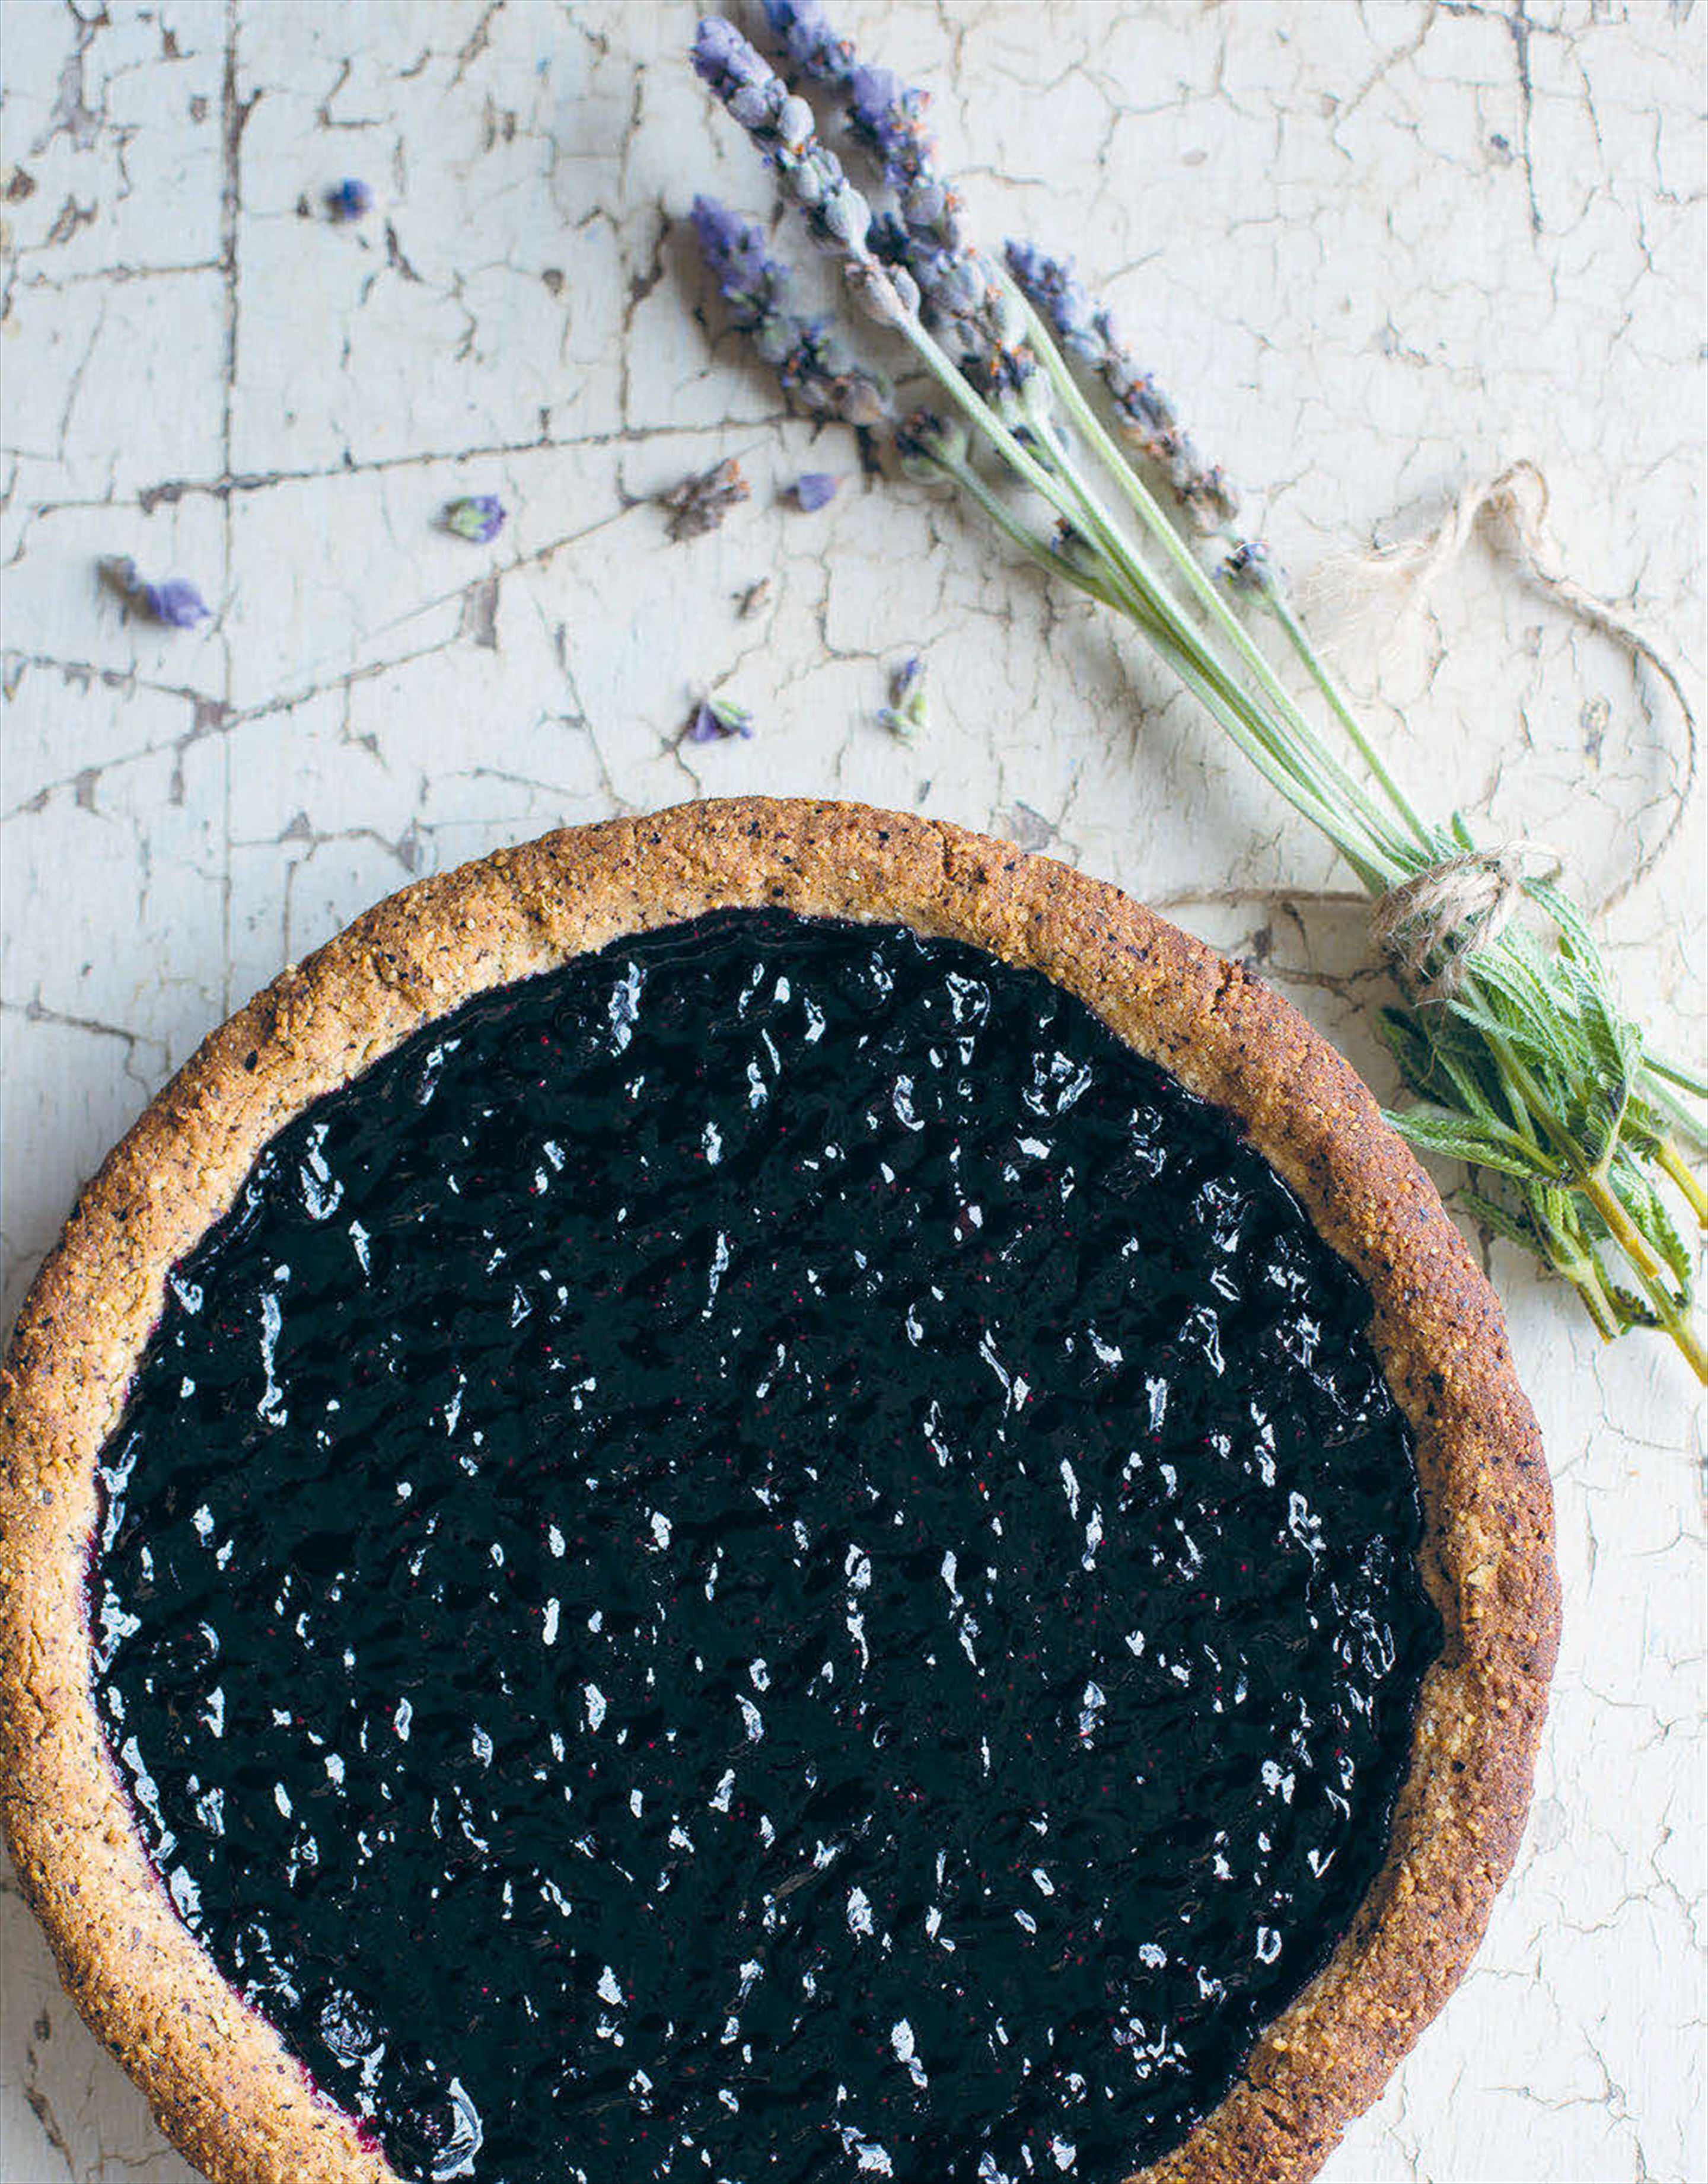 Blueberry and lavender pie with hazelnut crust